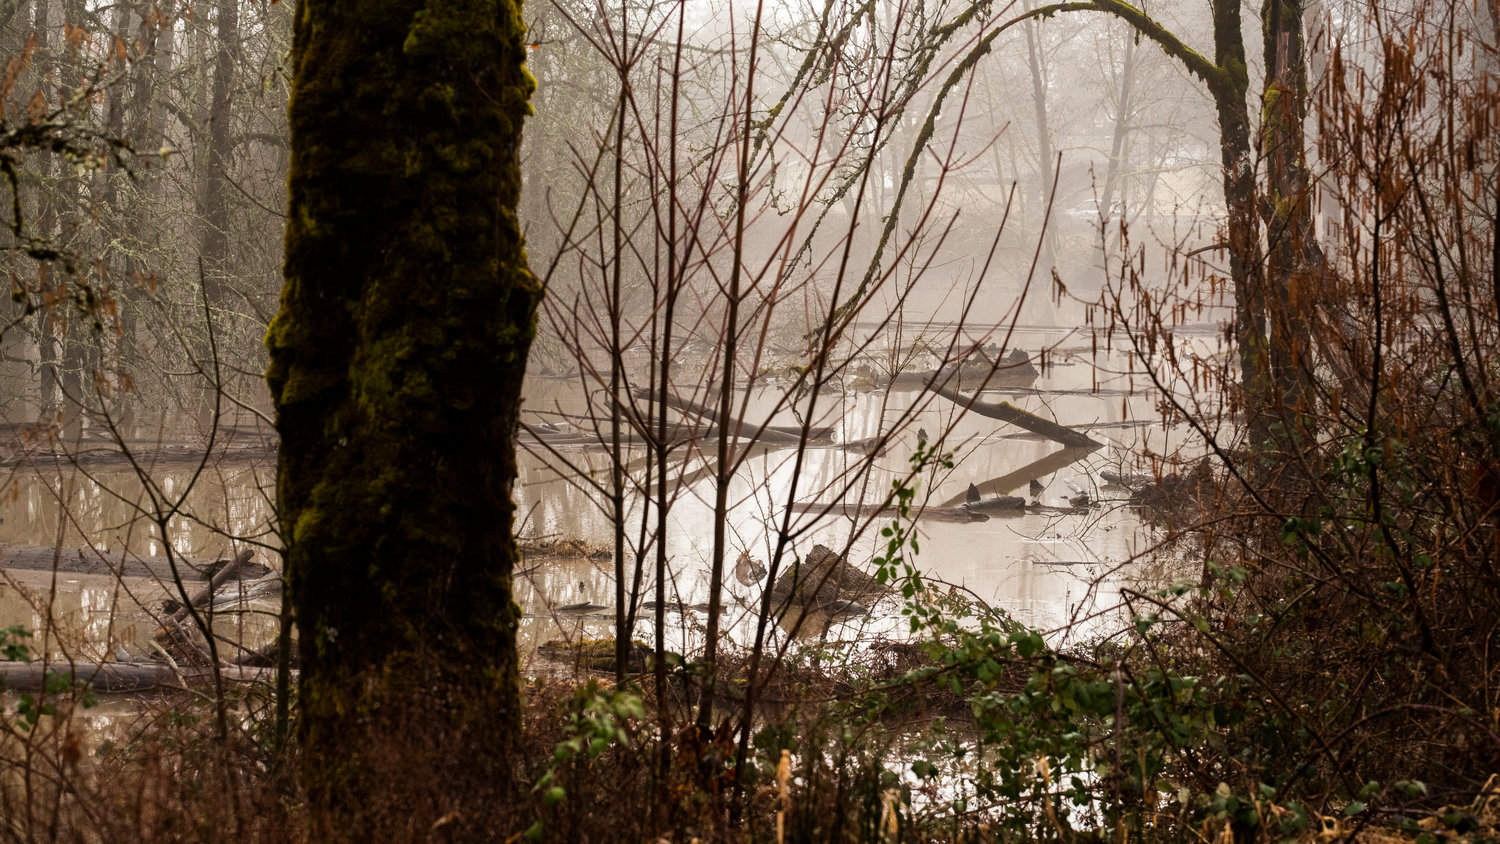 Logs and debris float down the Cowlitz River off Highway 131 near Randle on Tuesday.